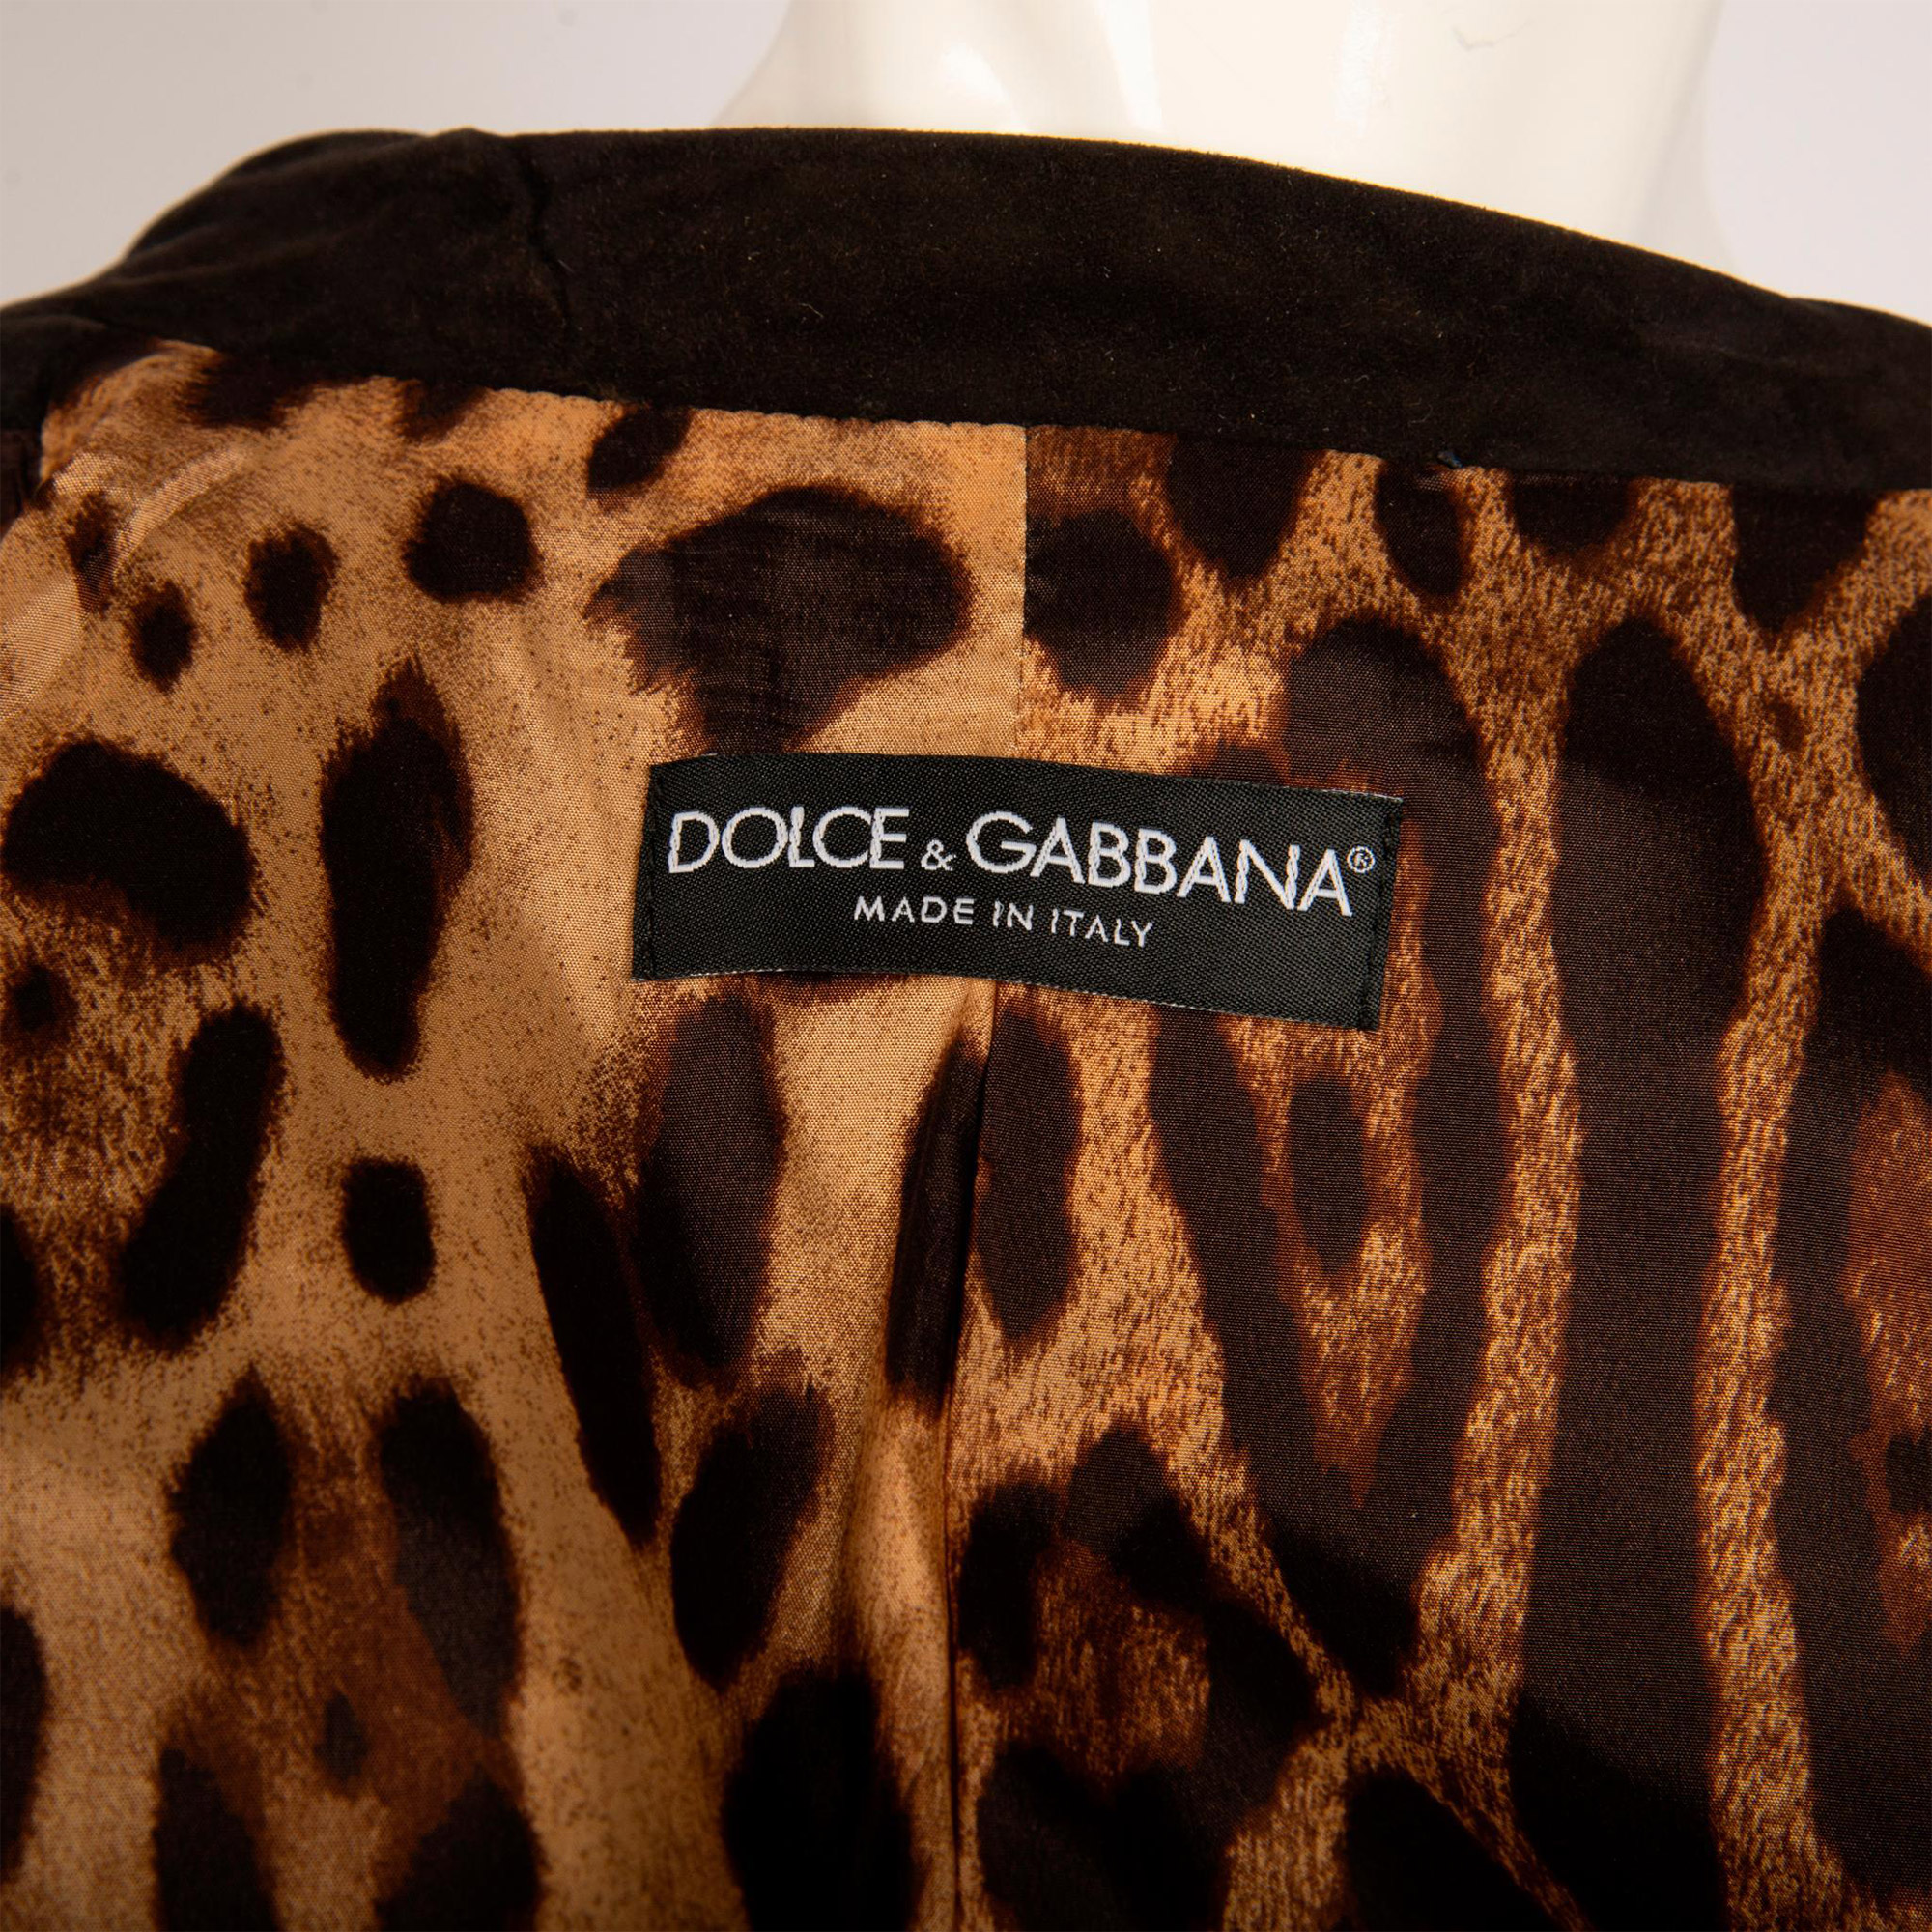 Dolce & Gabbana Suede Woman Jacket Leopard Lining, Small - Image 5 of 14